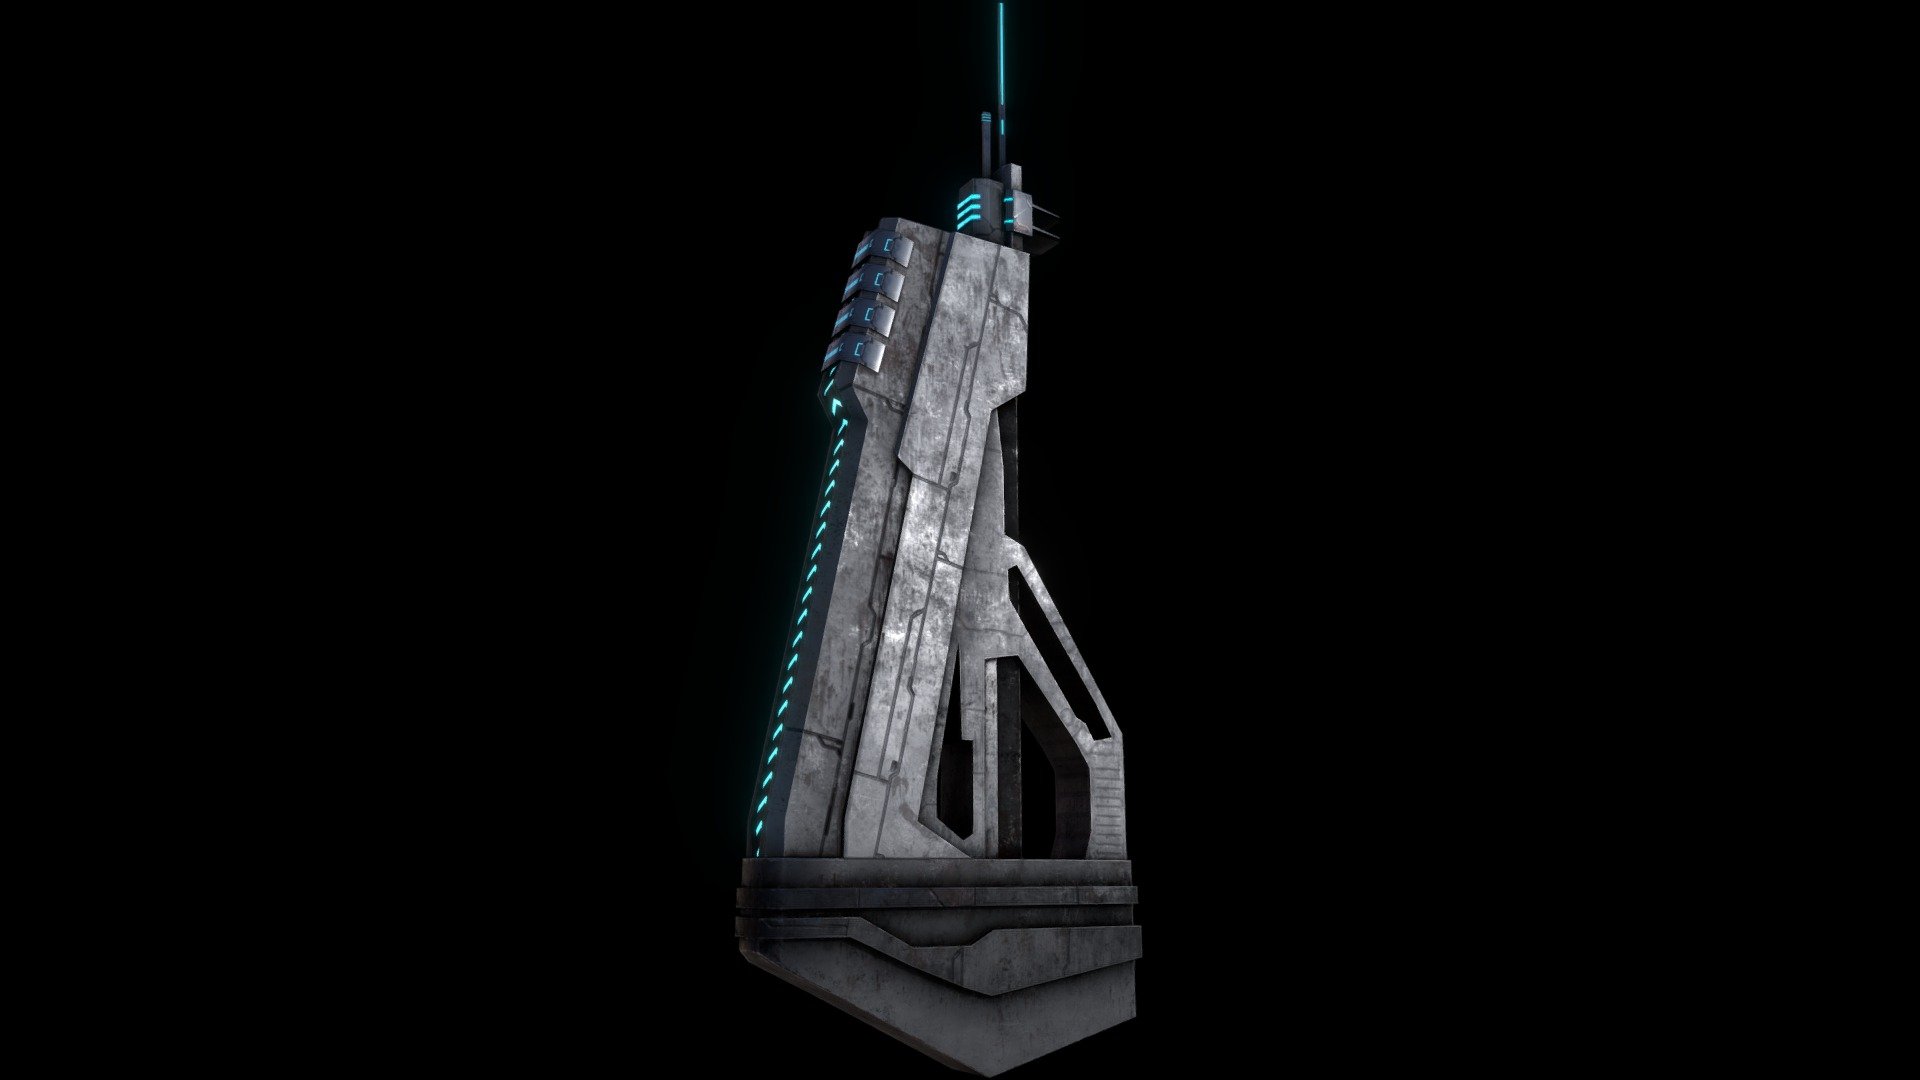 Modeled in Blender, textured in Substance Painter

Based on a Forerunner structure in the map Forge World from Halo Reach!

1 material total

Free to use! - Forge World Forerunner Tower - (FREE DOWNLOAD) - Download Free 3D model by Glitch5970 3d model